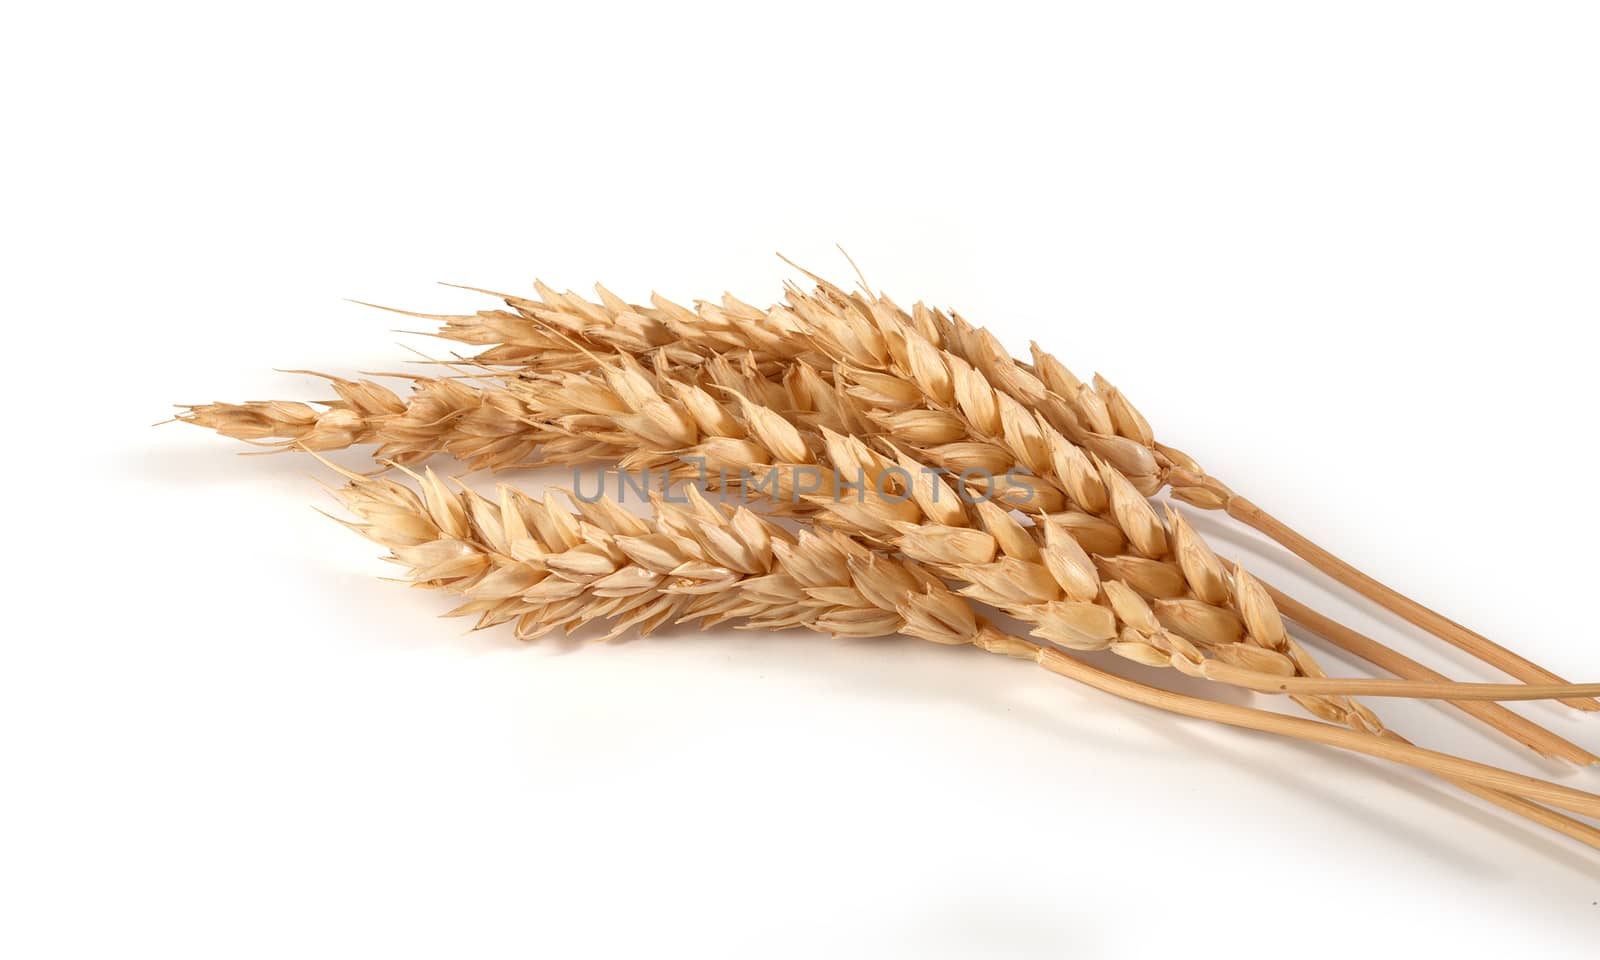 Some spikelets of wheat on the white background